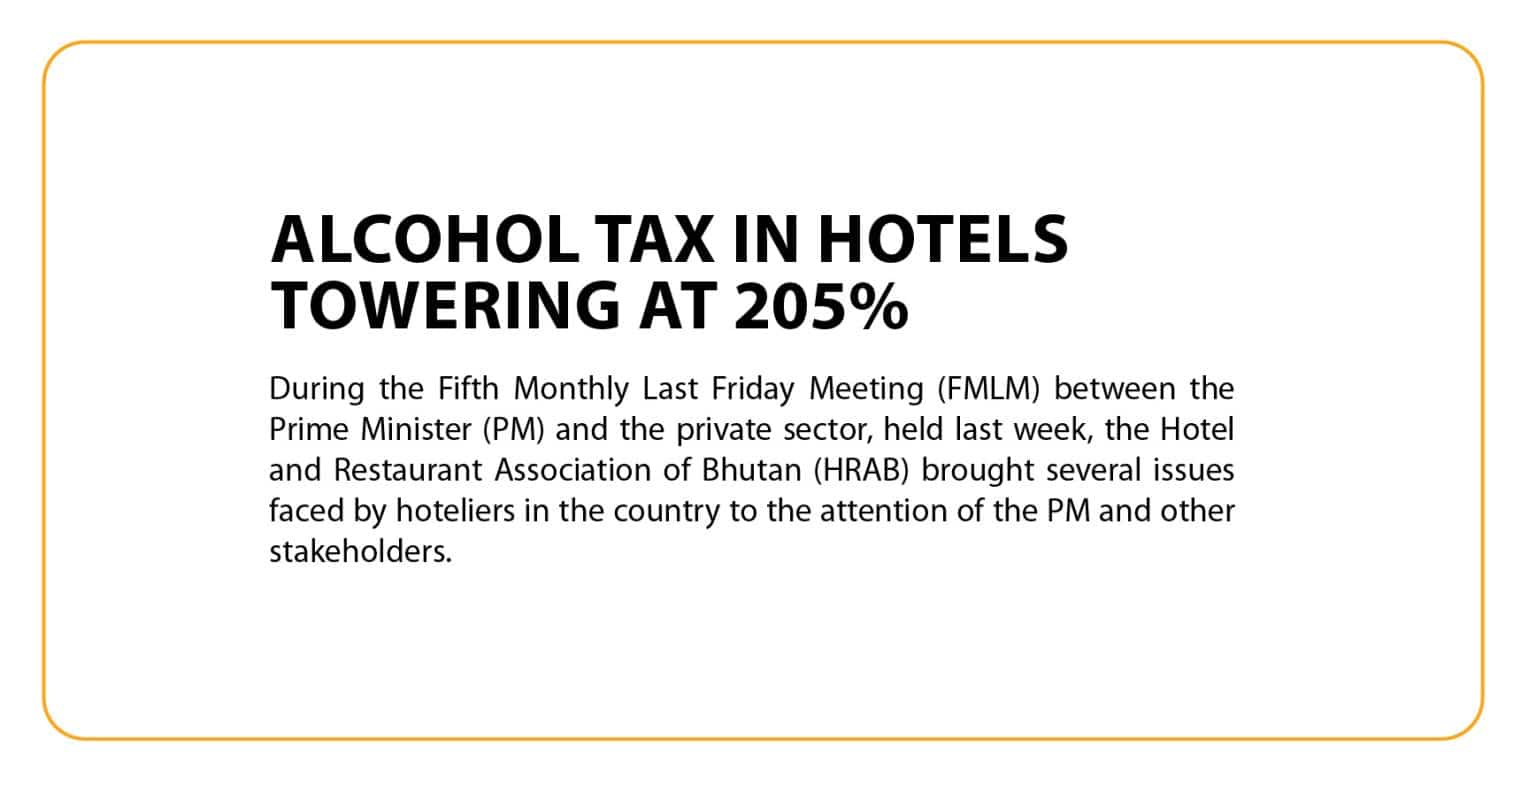 Alcohol tax in hotels towering at 205%